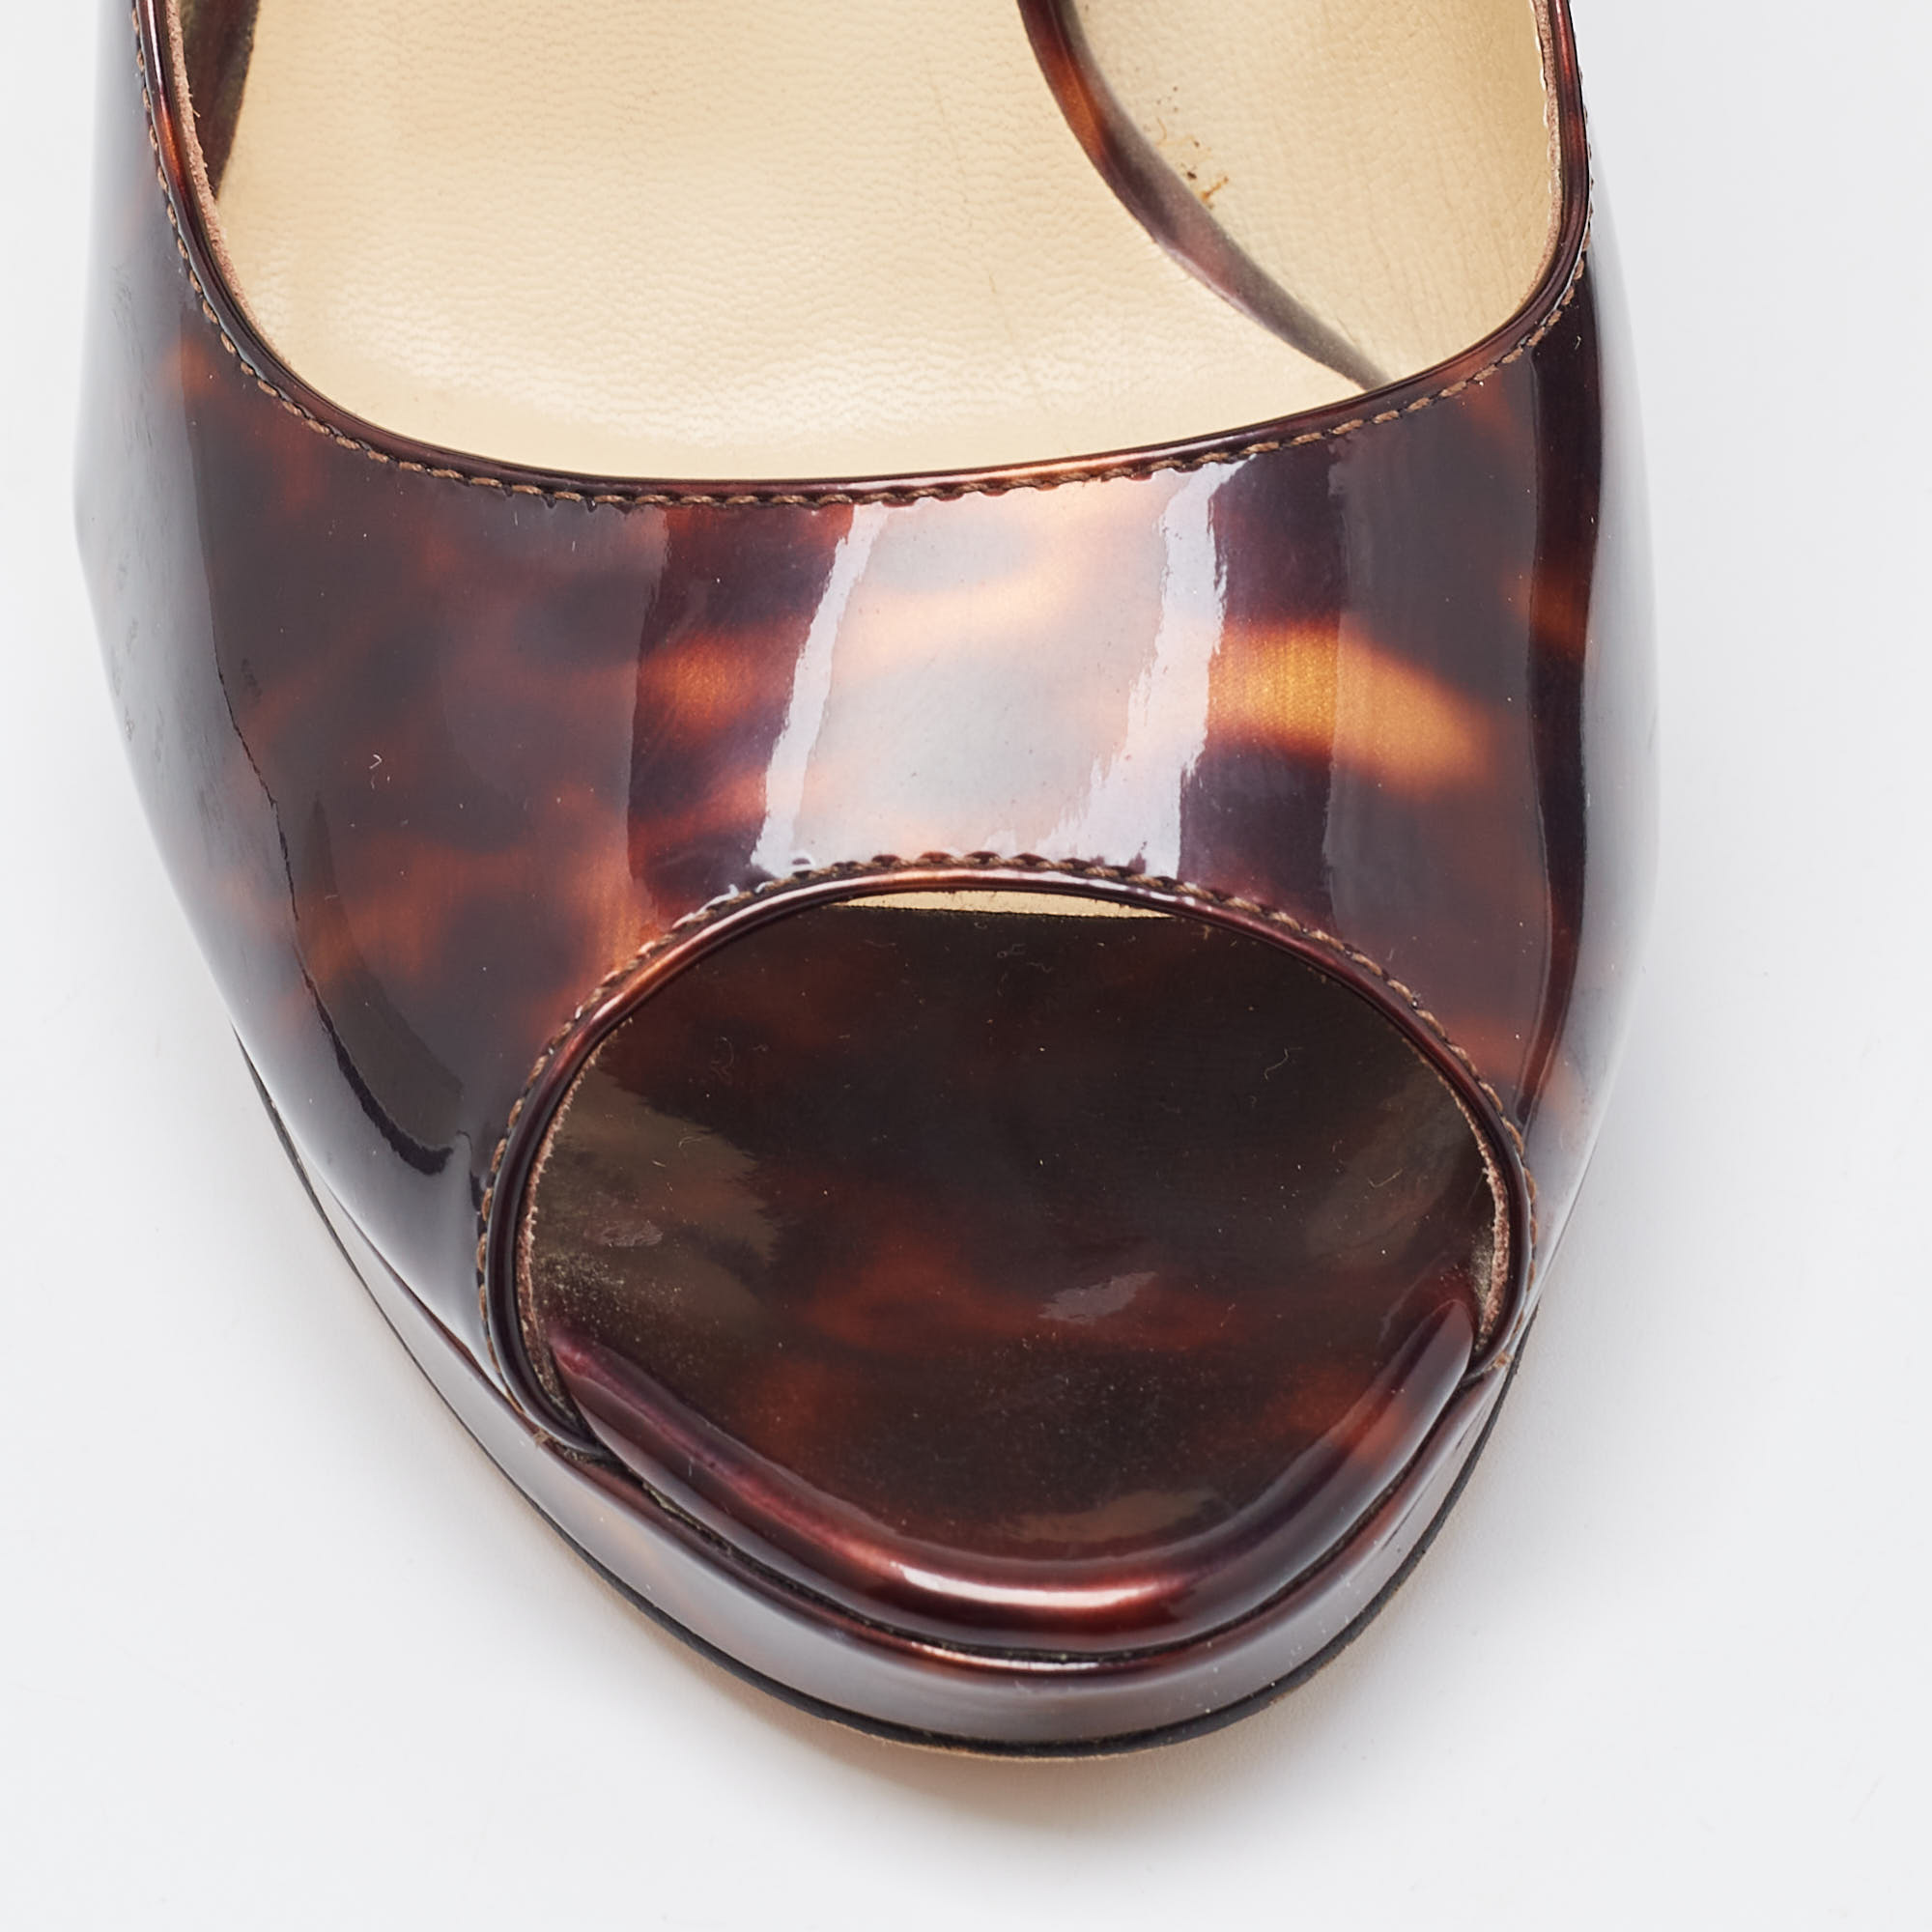 Jimmy Choo Black/Brown Patent Leather Slip On Pumps Size 37.5